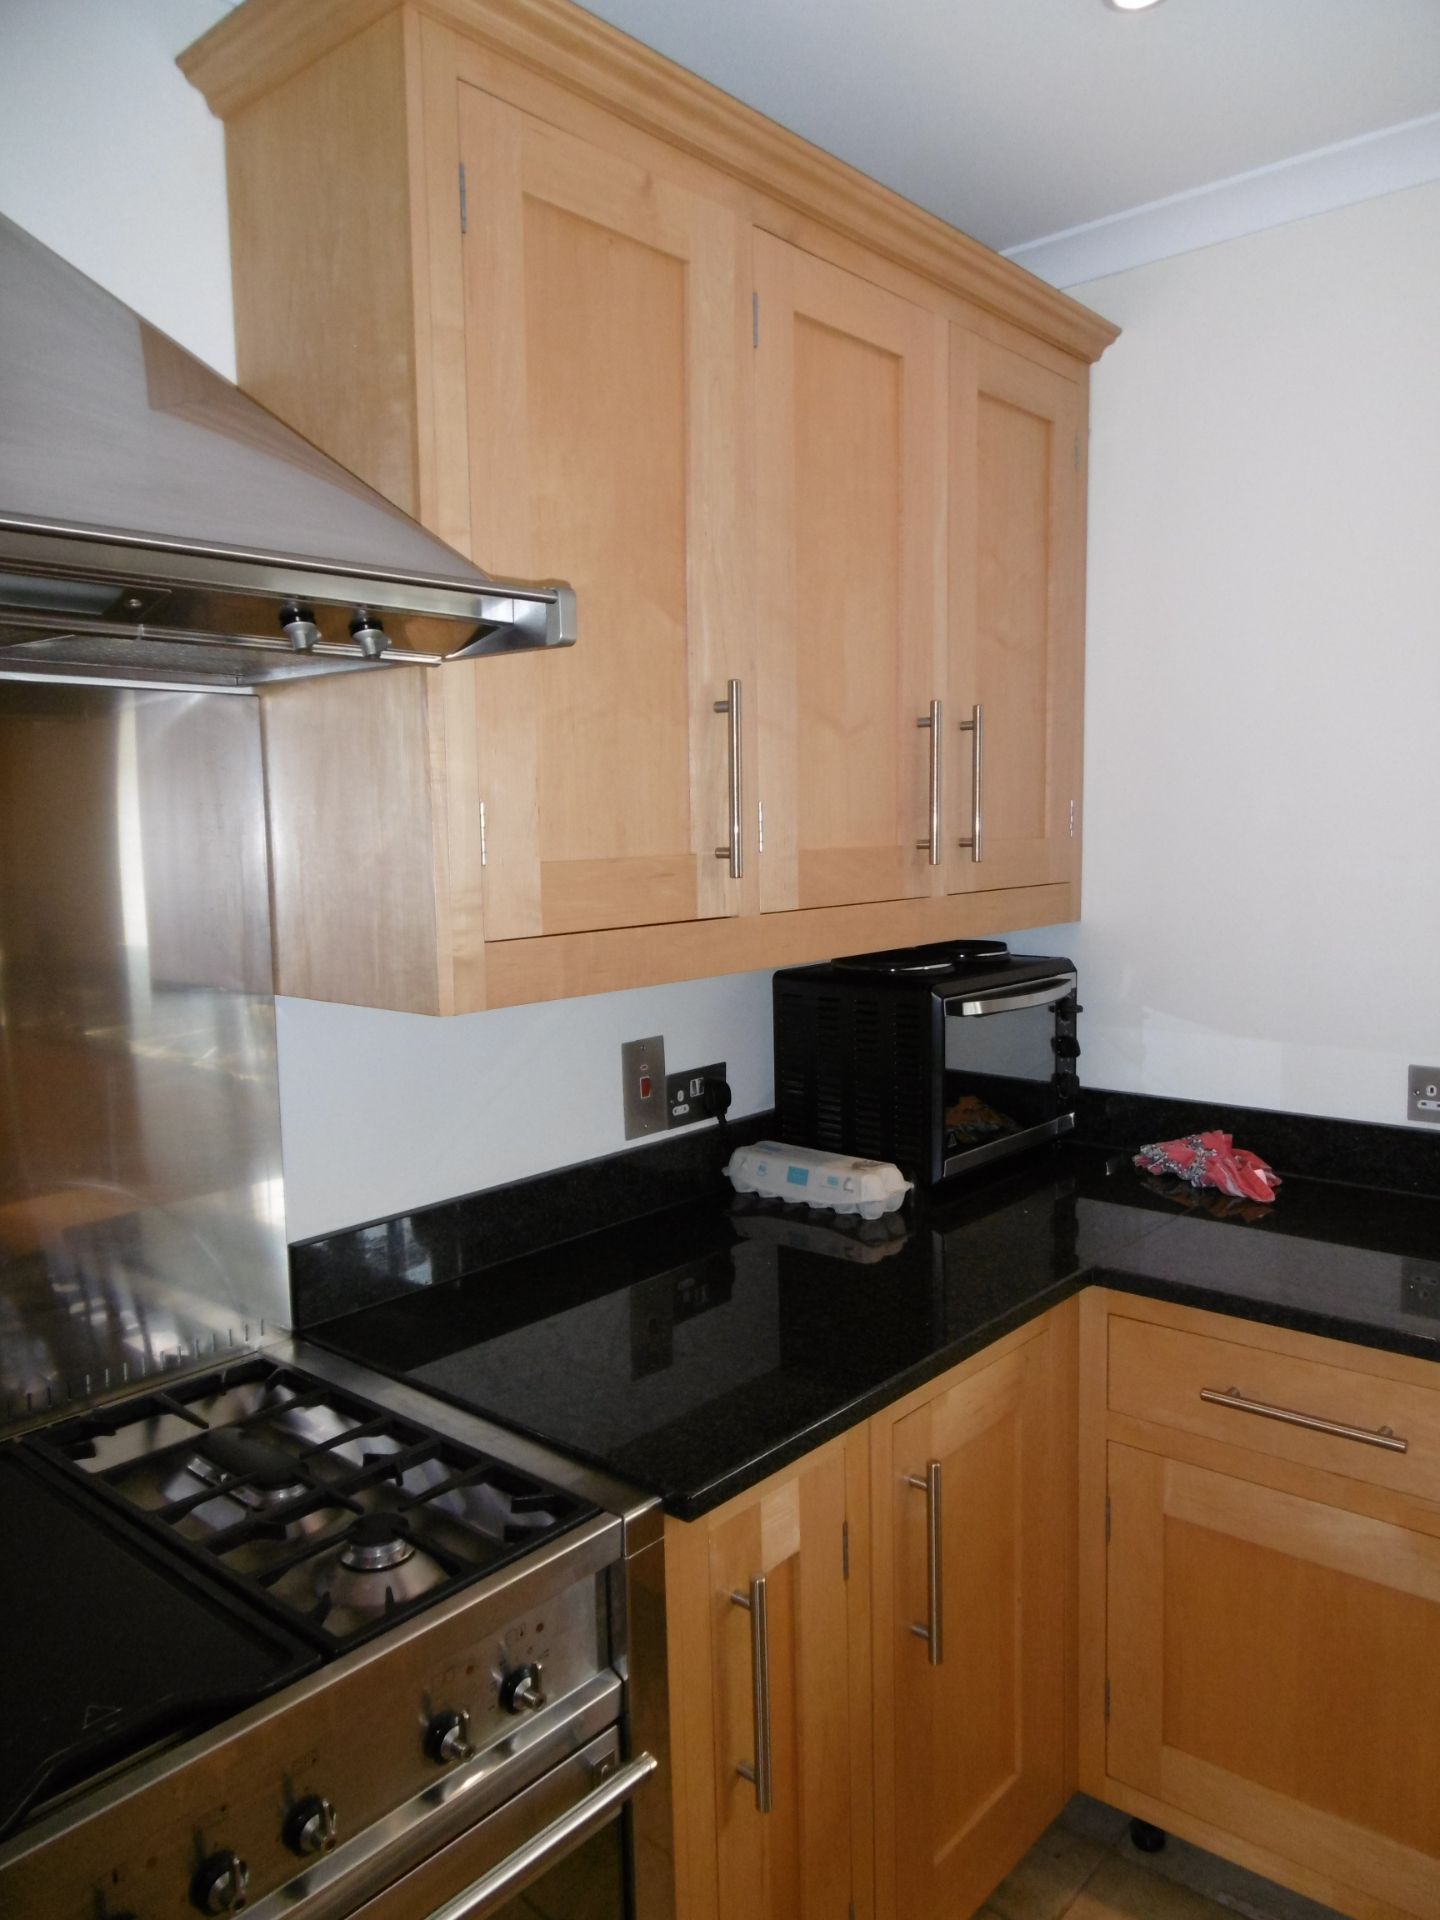 Luxury Used Maple Kitchen with Appliances including Range Cooker - Image 2 of 5